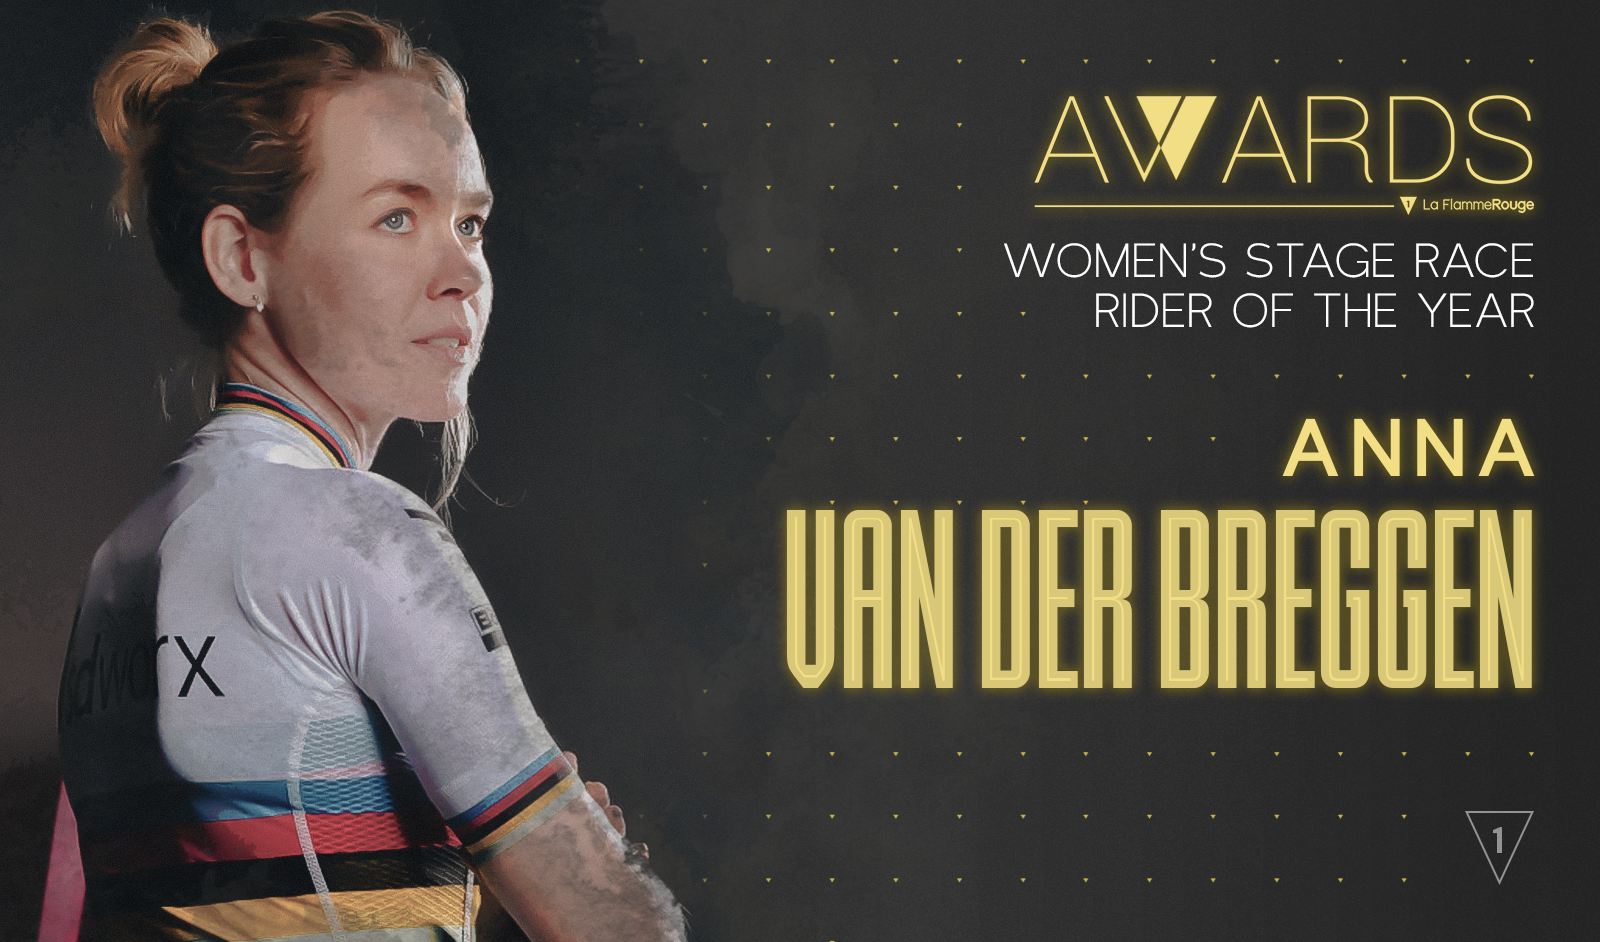 Women’s stage race rider of the year